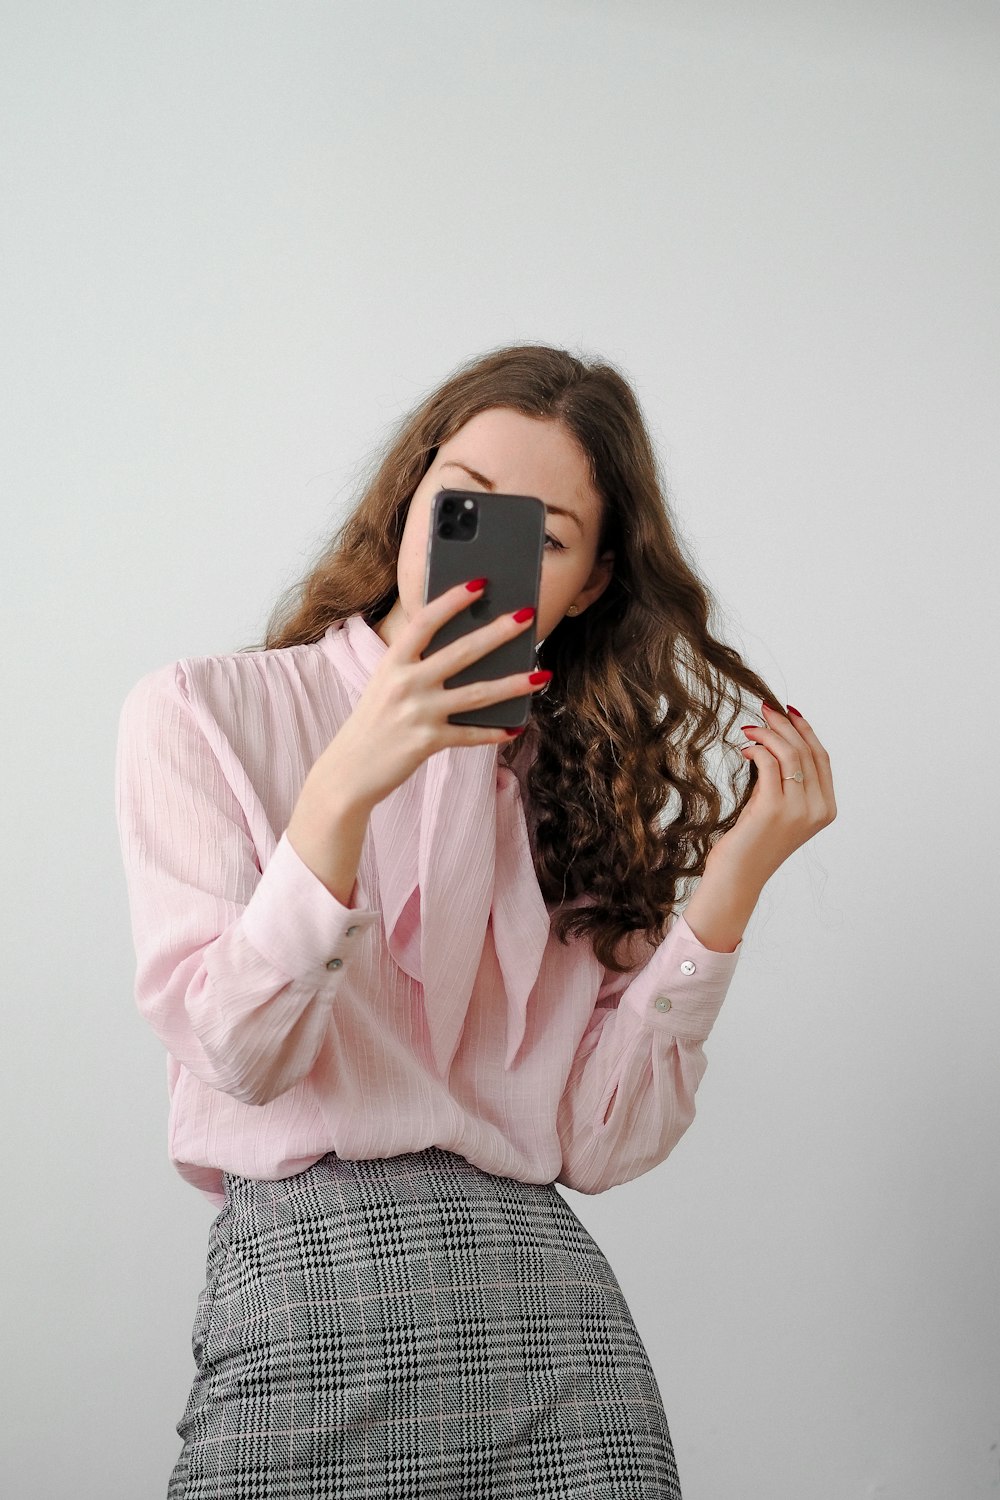 a woman taking a picture of herself with a cell phone